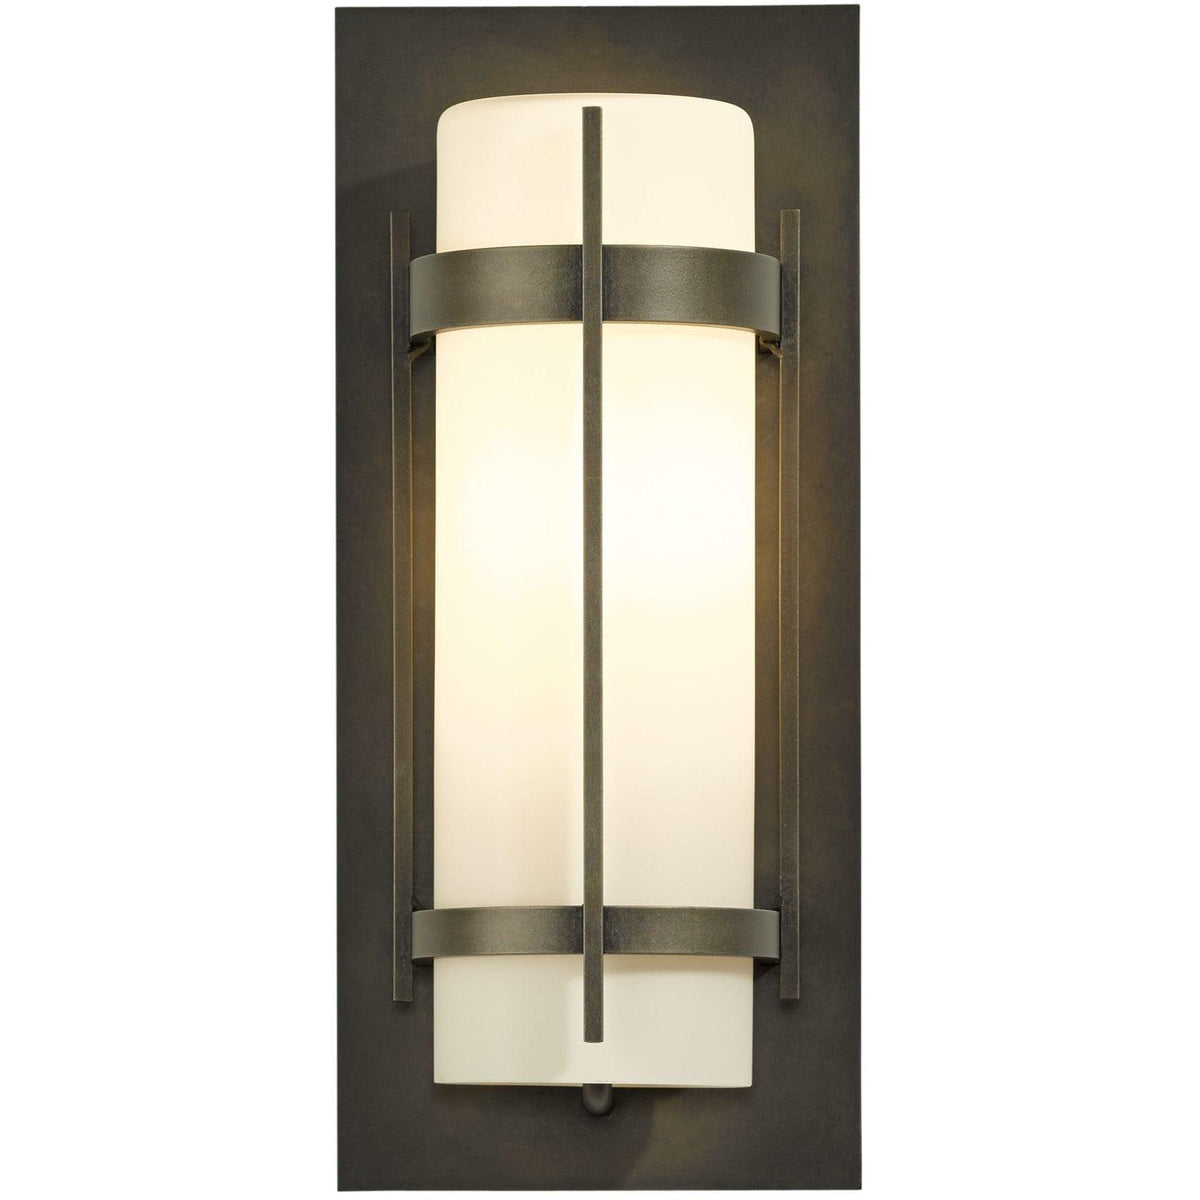 Hubbardton Forge - Banded 15-Inch One Light Outdoor Wall Sconce - 305893-SKT-77-GG0034 | Montreal Lighting & Hardware